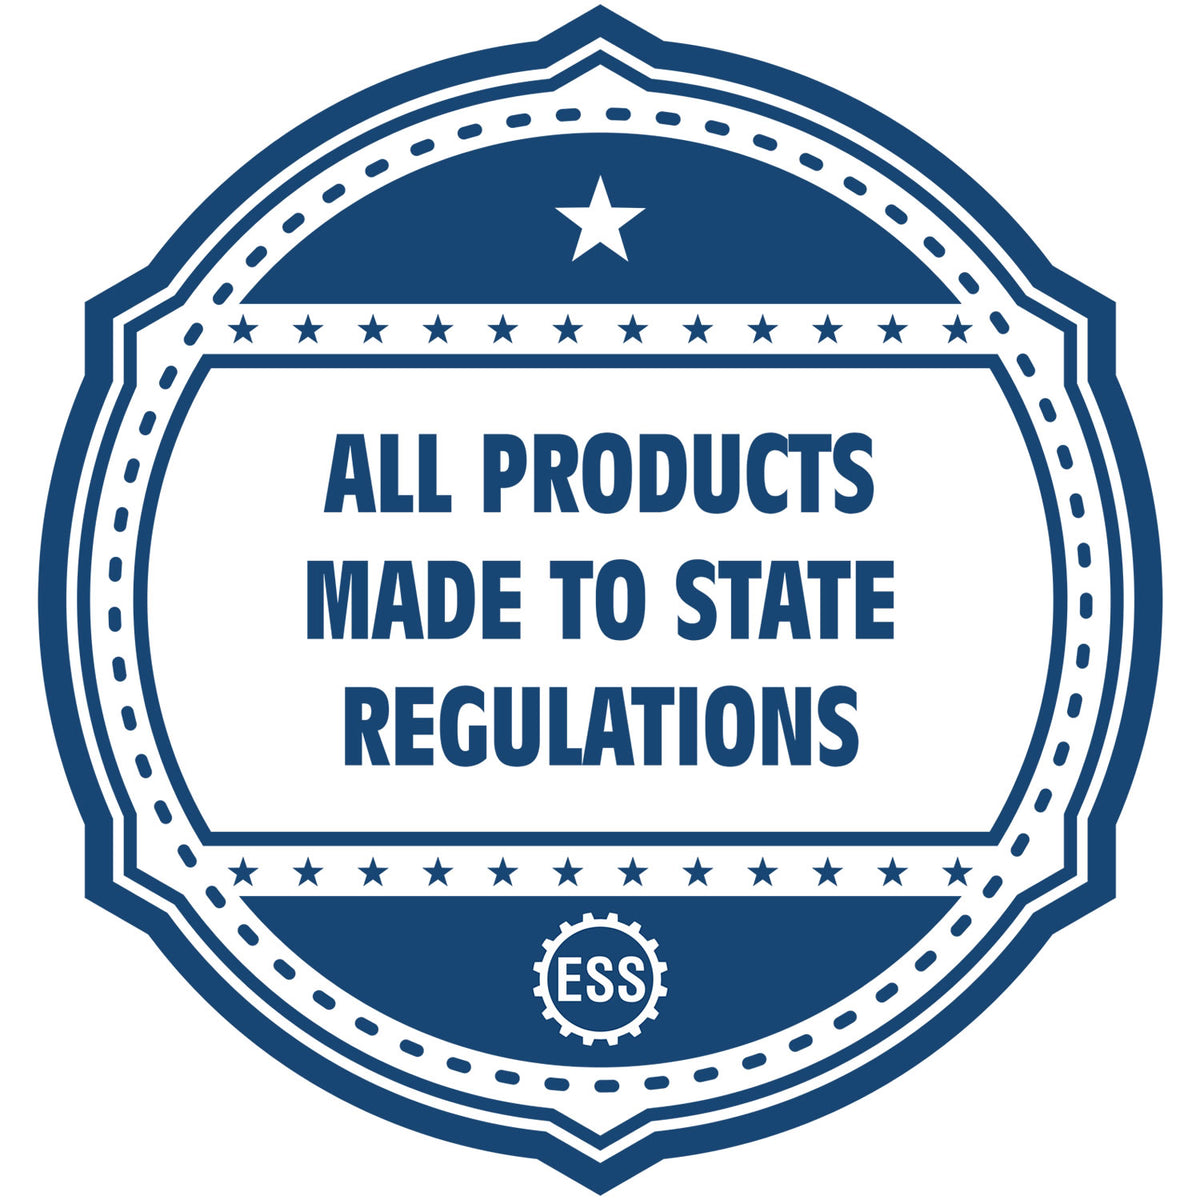 An icon or badge element for the Handheld West Virginia Architect Seal Embosser showing that this product is made in compliance with state regulations.